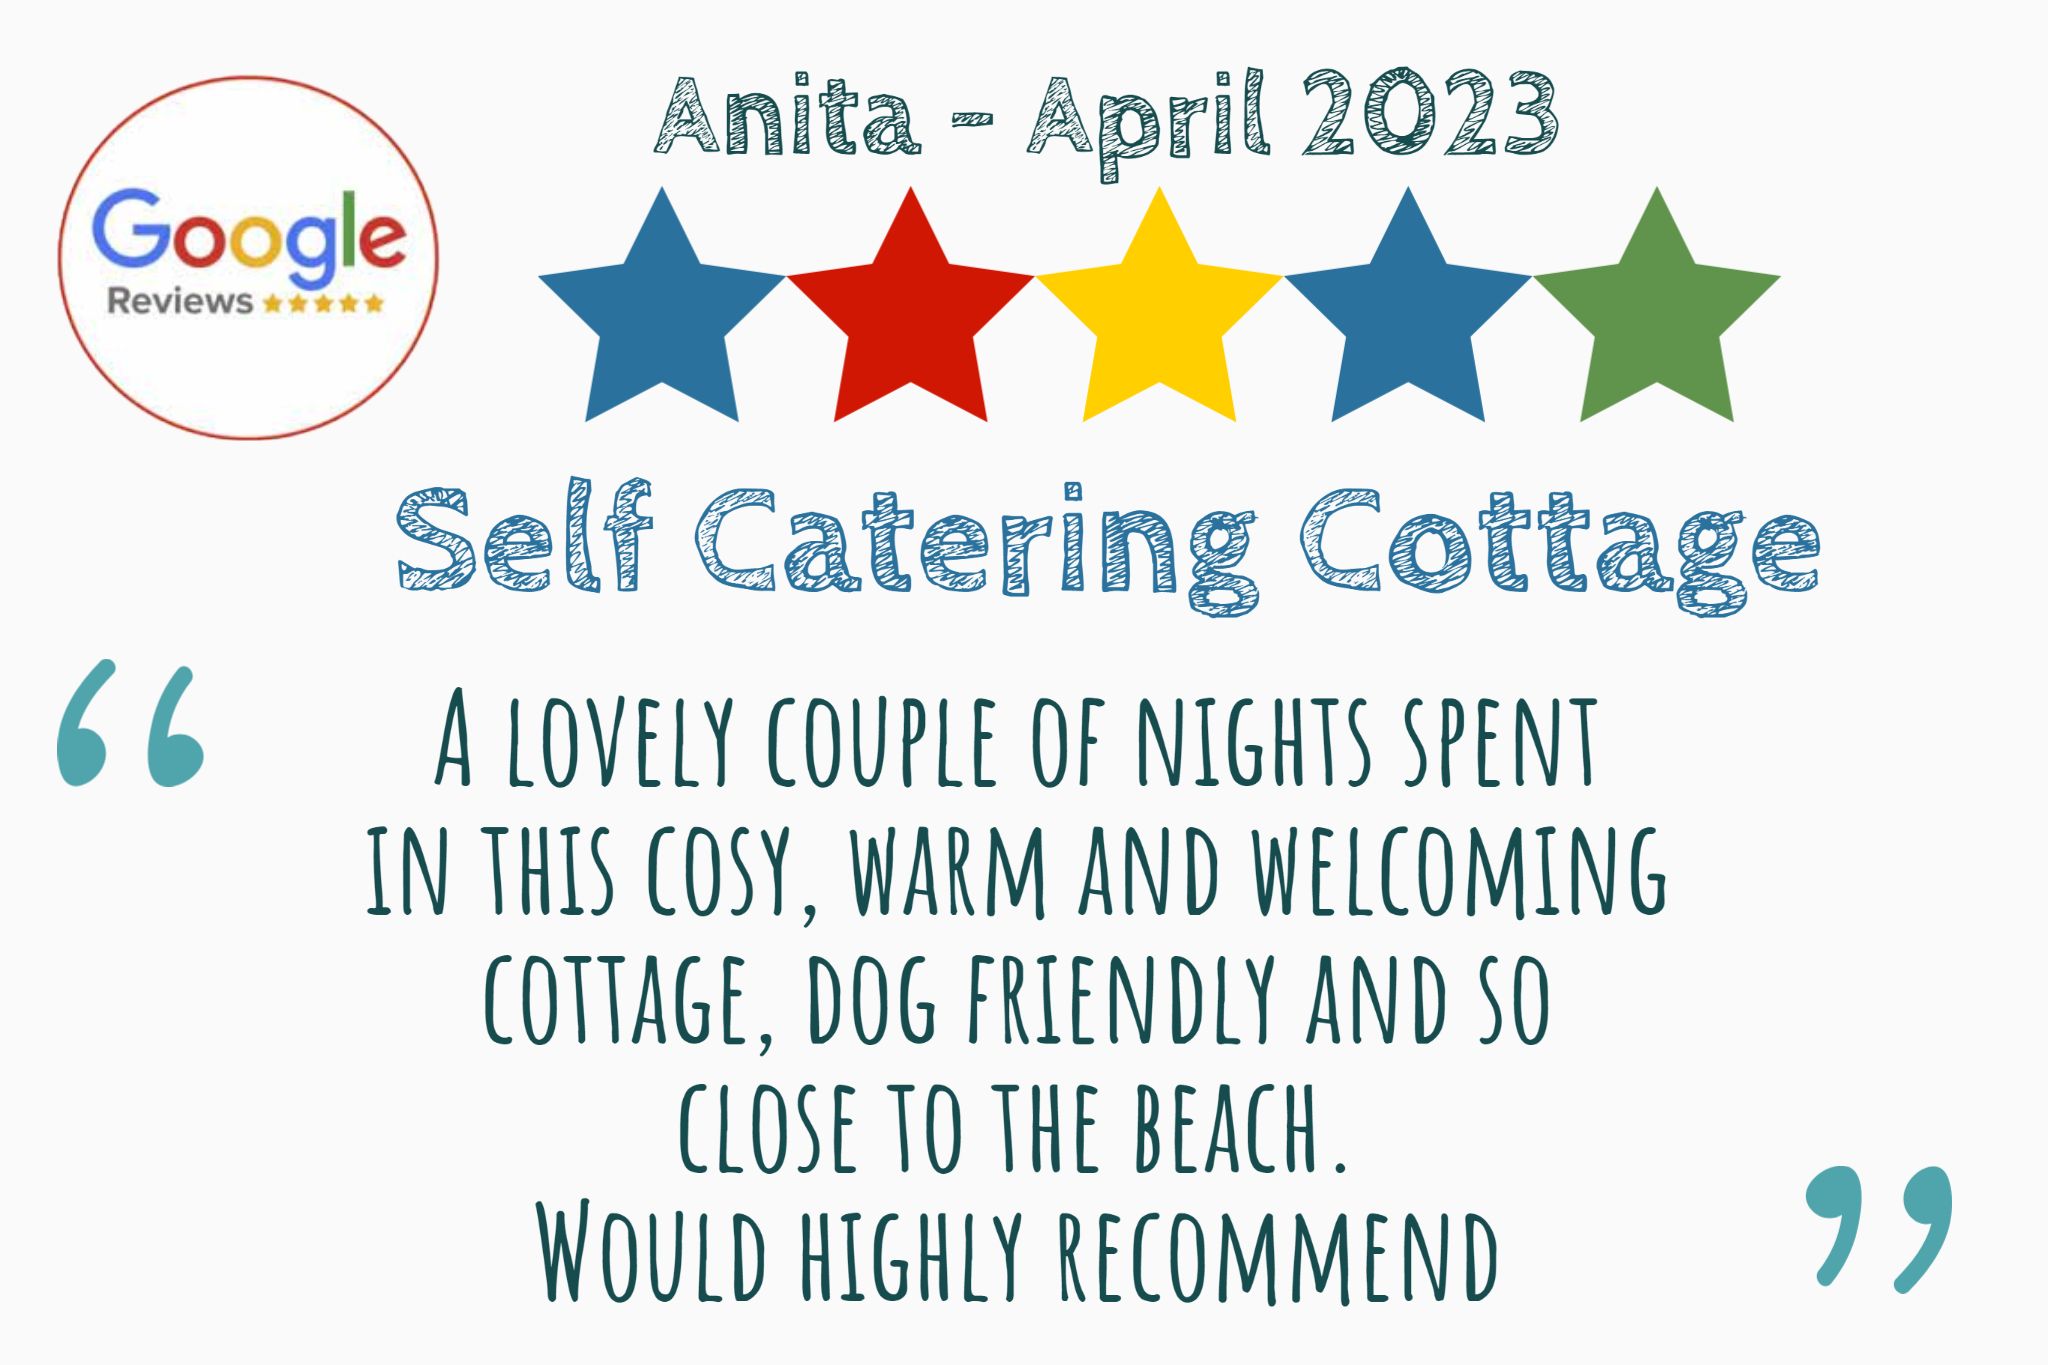 Anita's Google Review of our self-catering cottage hotel